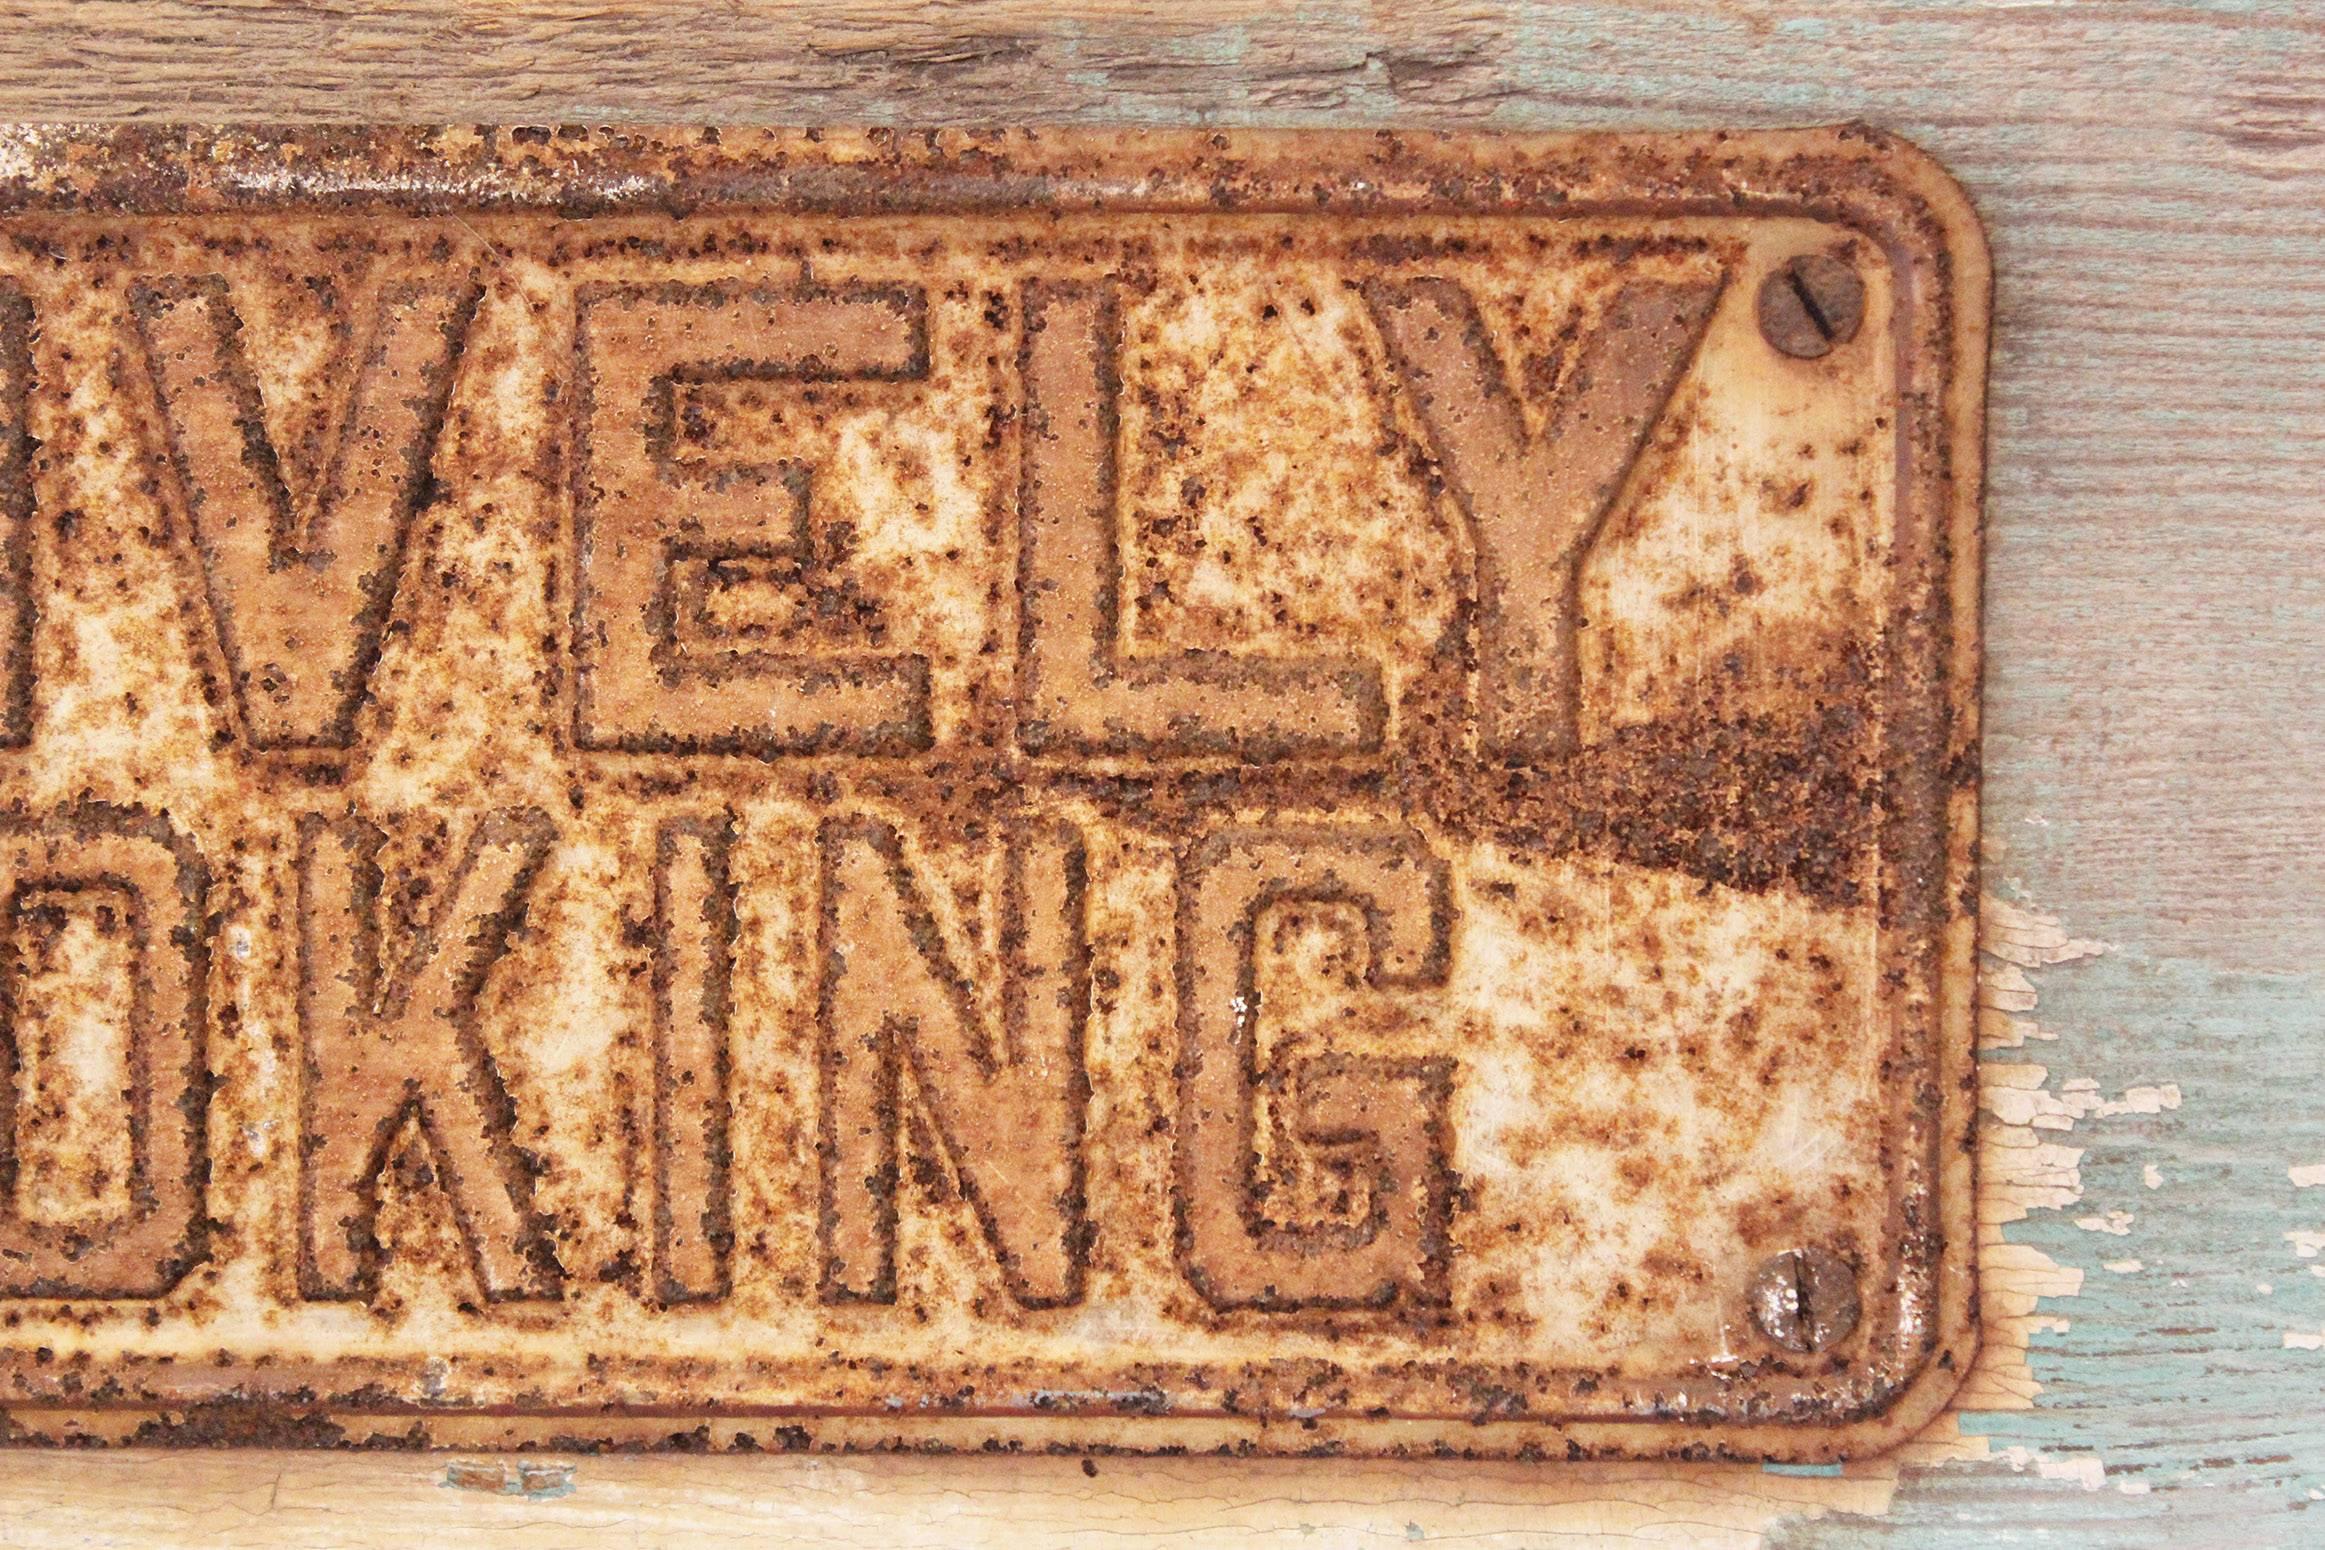 POSITIVELY NO SMOKING Vintage Metal Sign on Painted Wood Block 2